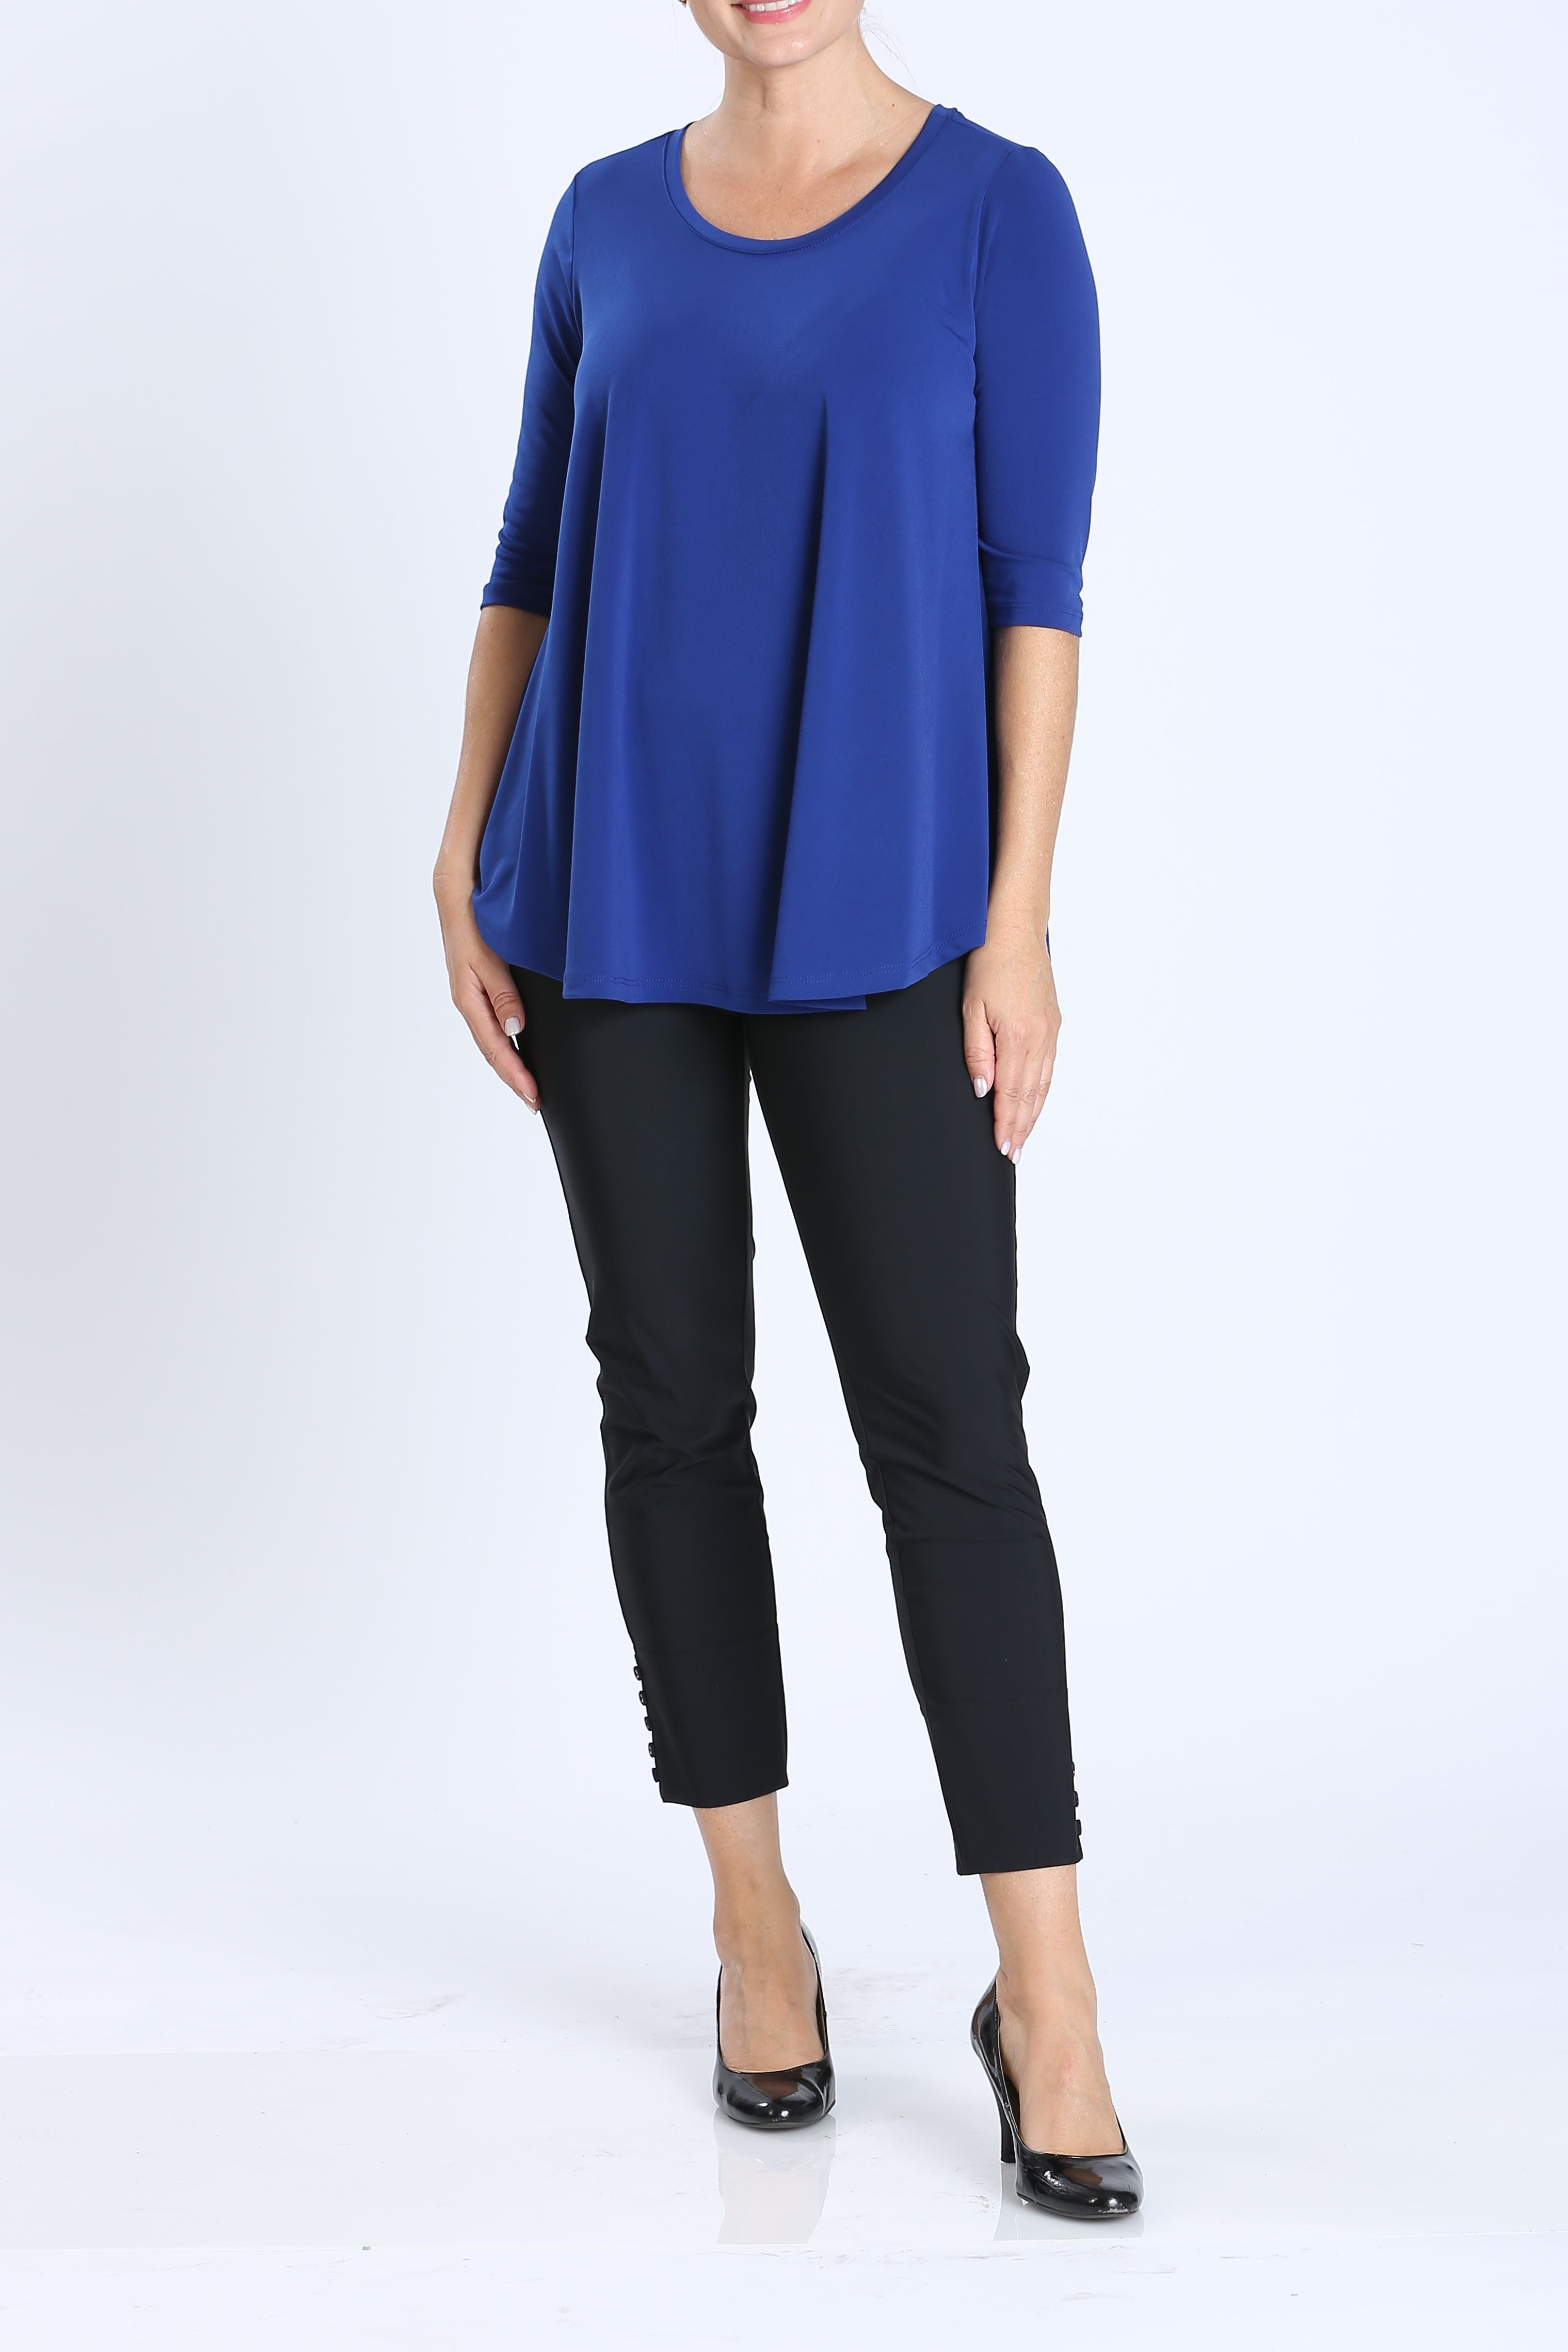 A-line Flare Top - Small / Blue